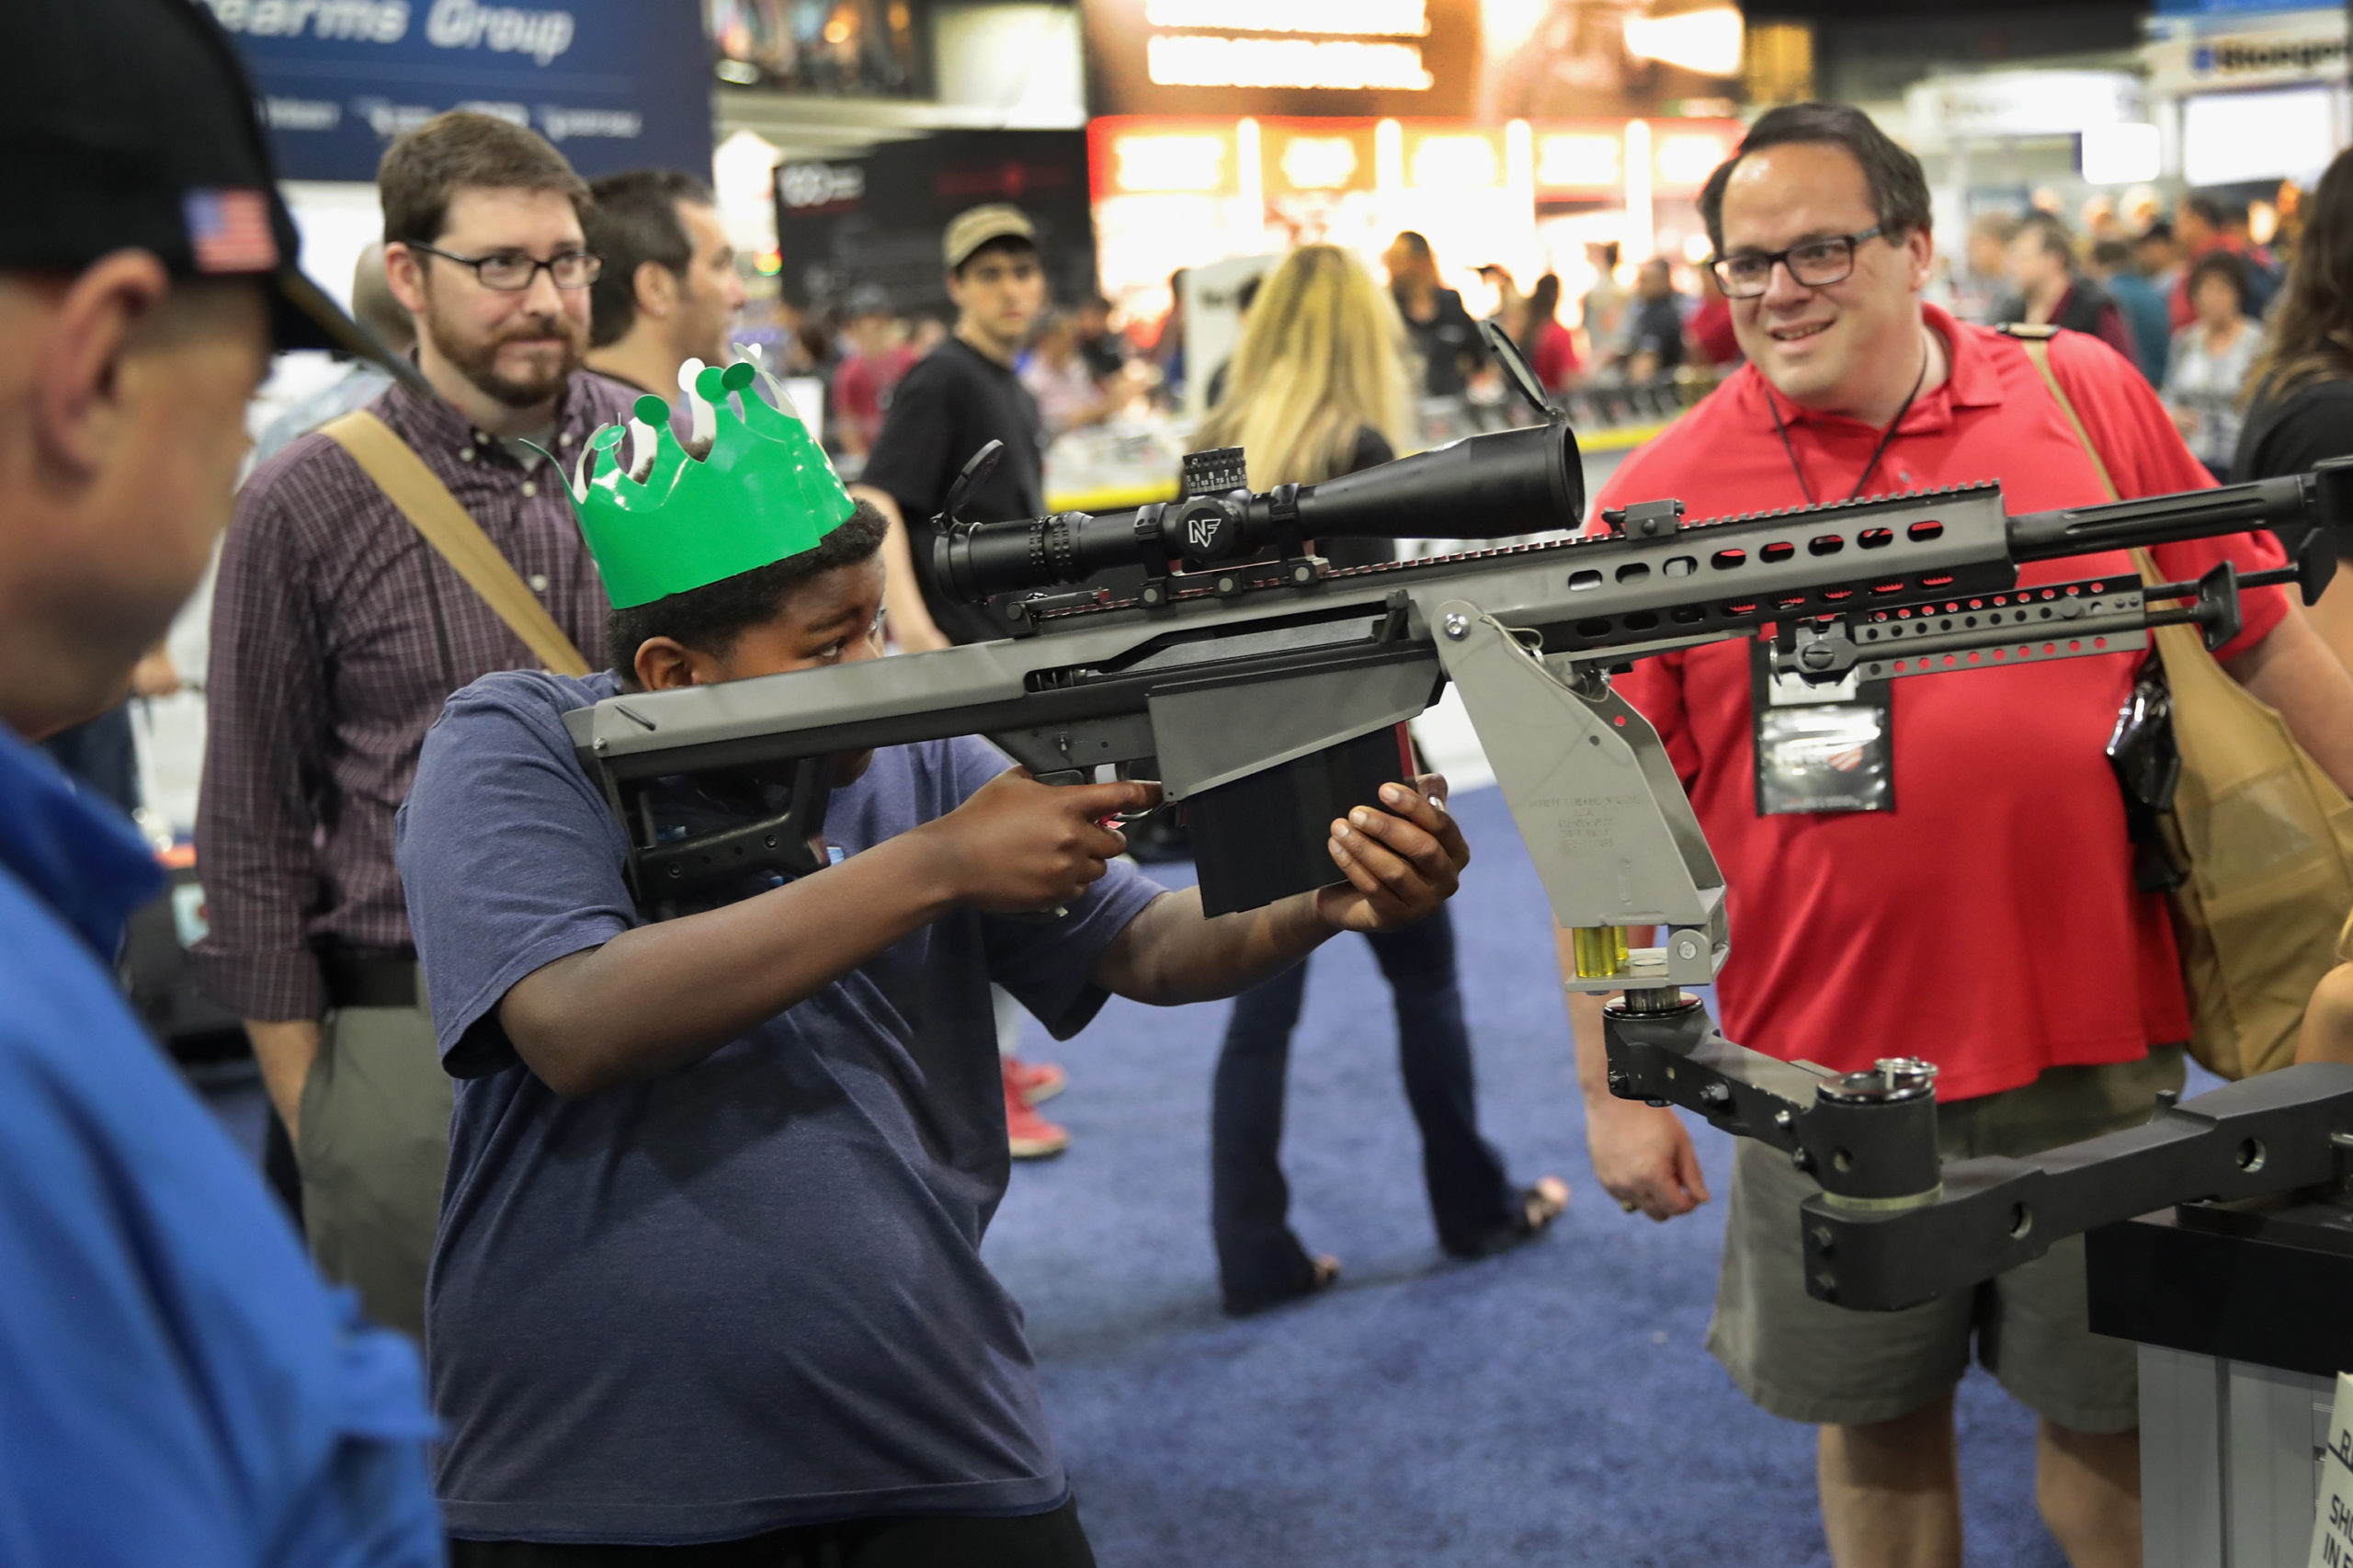 National Rifle Association members look over guns in the Barrett display at the 146th NRA Annual Meetings Exhibits on April 29, 2017 in Atlanta, Georgia. (Photo by Scott Olson/Getty Images)